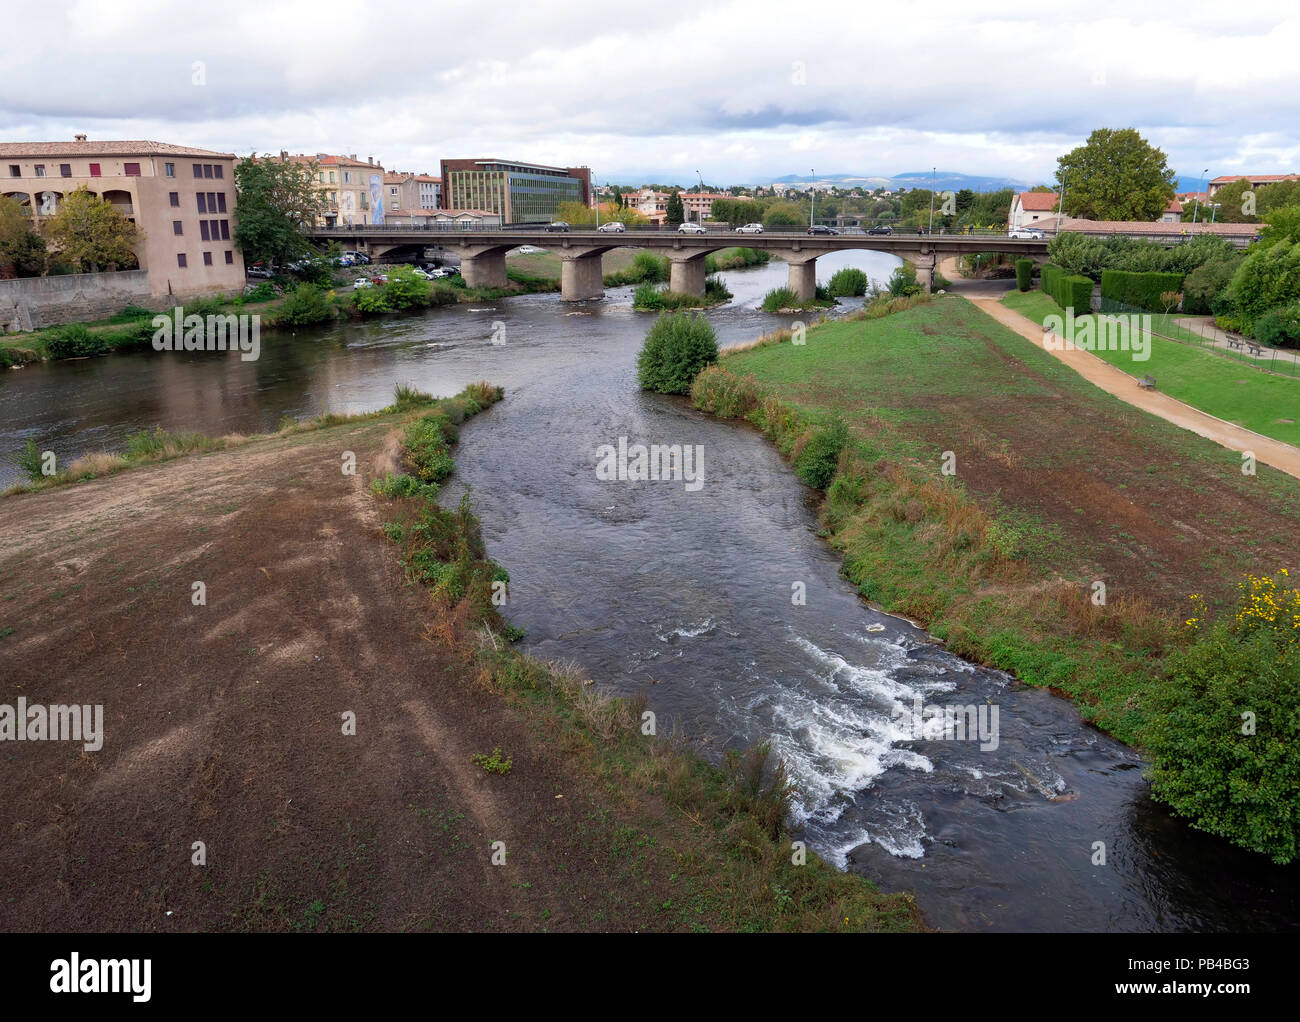 The River Aude running through the modern city of Carcassonne, southern France Stock Photo